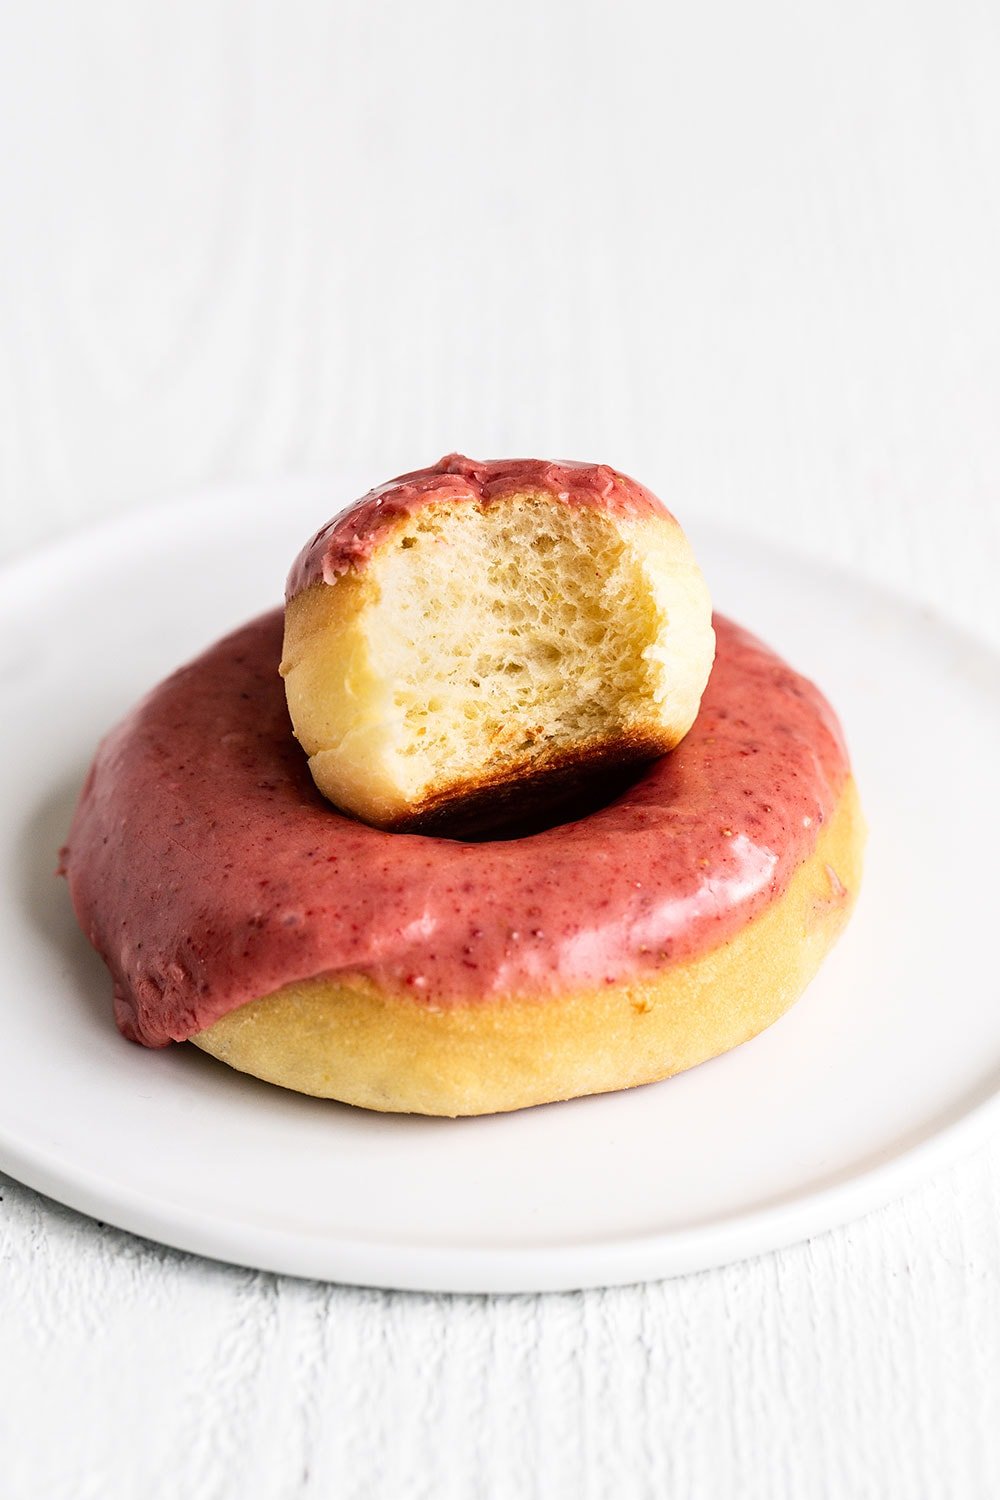 Doughnut on a plate with a half eaten doughnut hole. These are a perfect Easter dessert or Easter brunch option. 